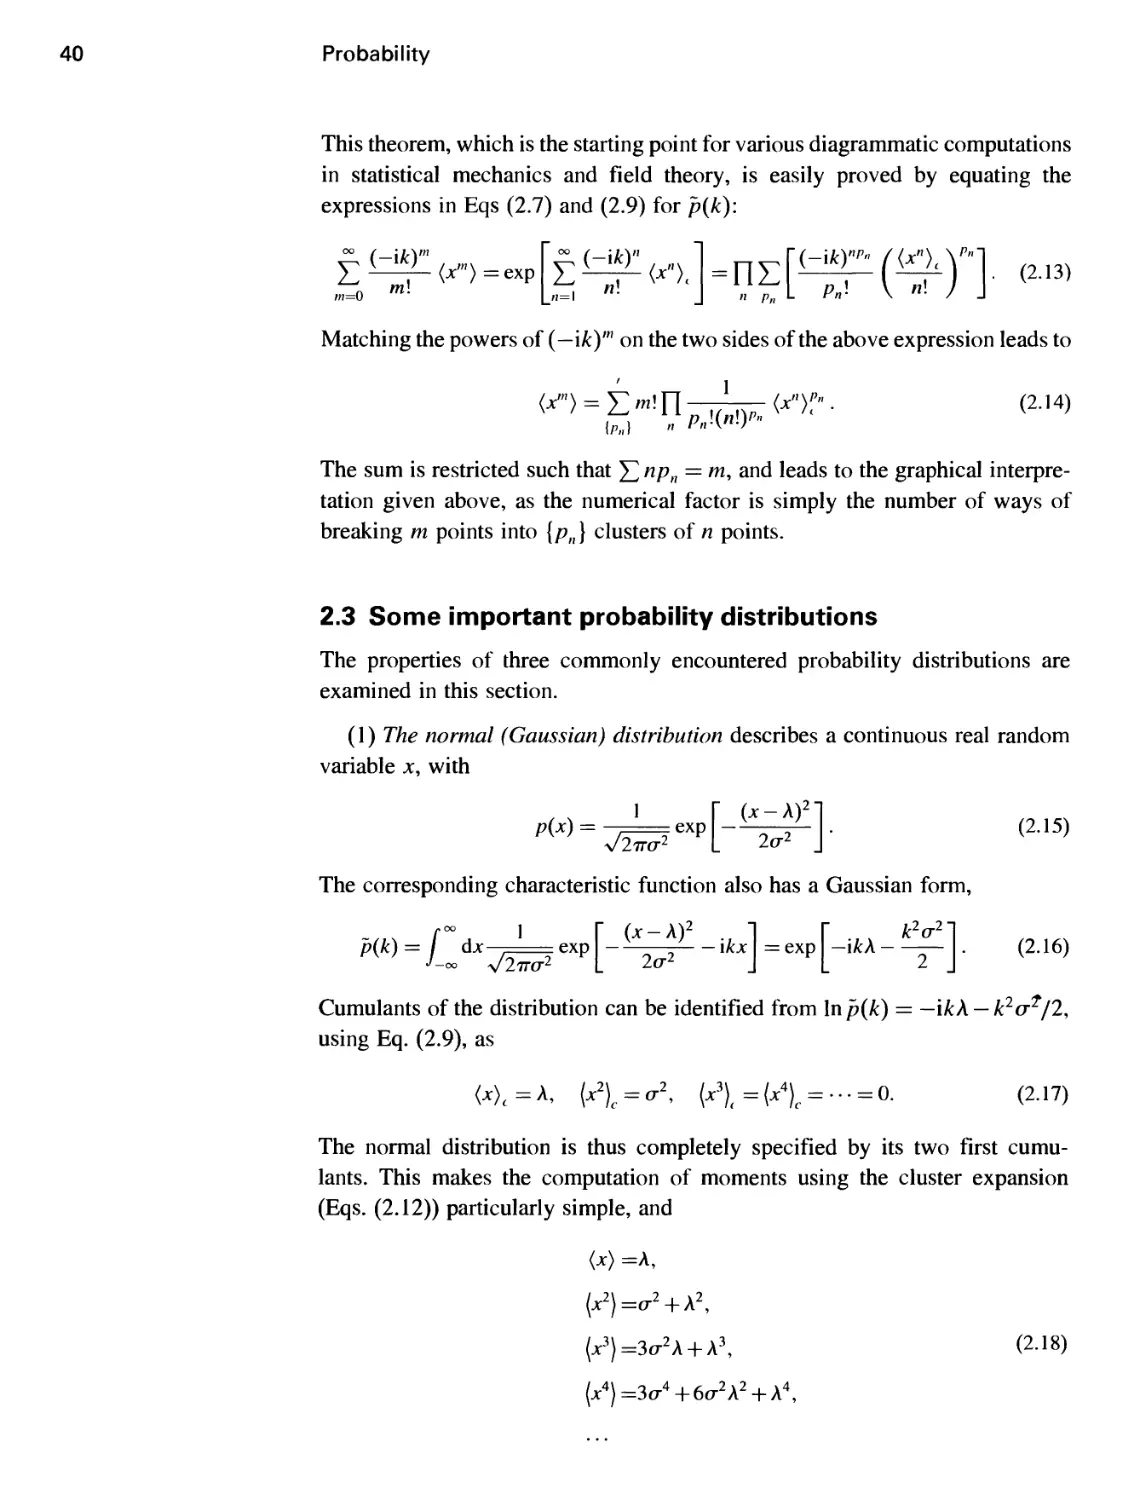 2.3 Some important probability distributions